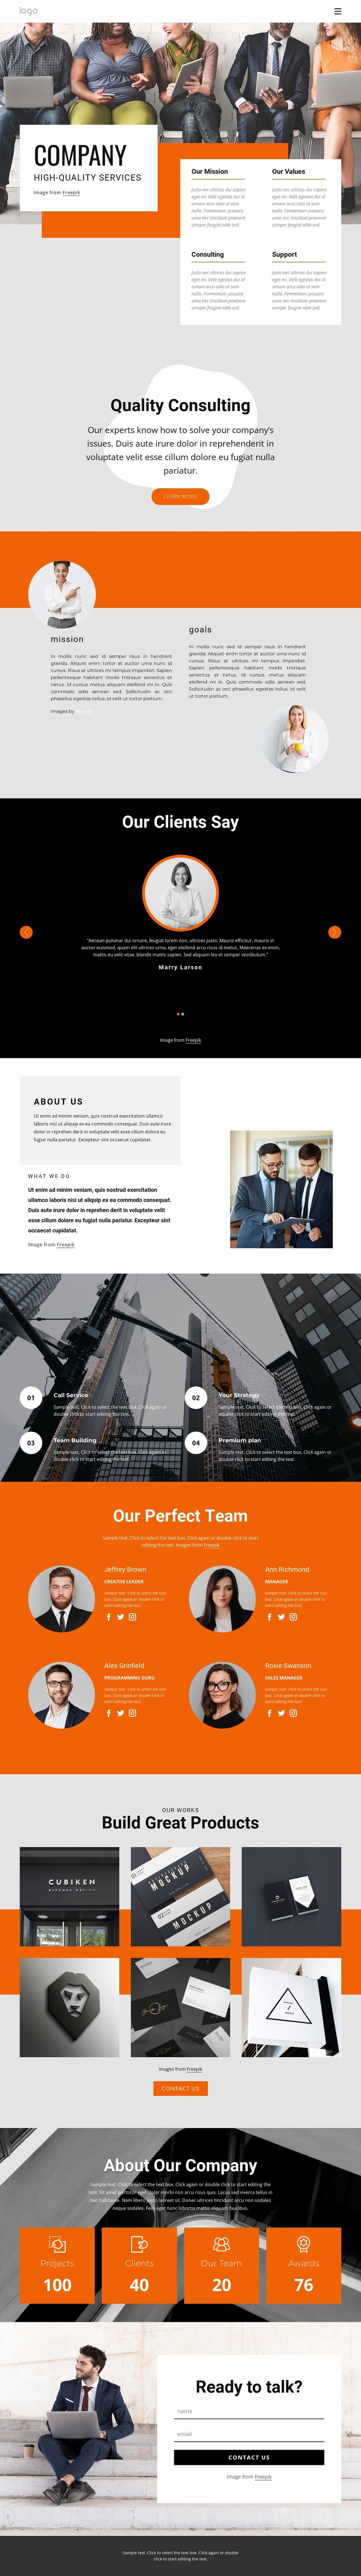 Hight quality consulting firm Website Builder Templates